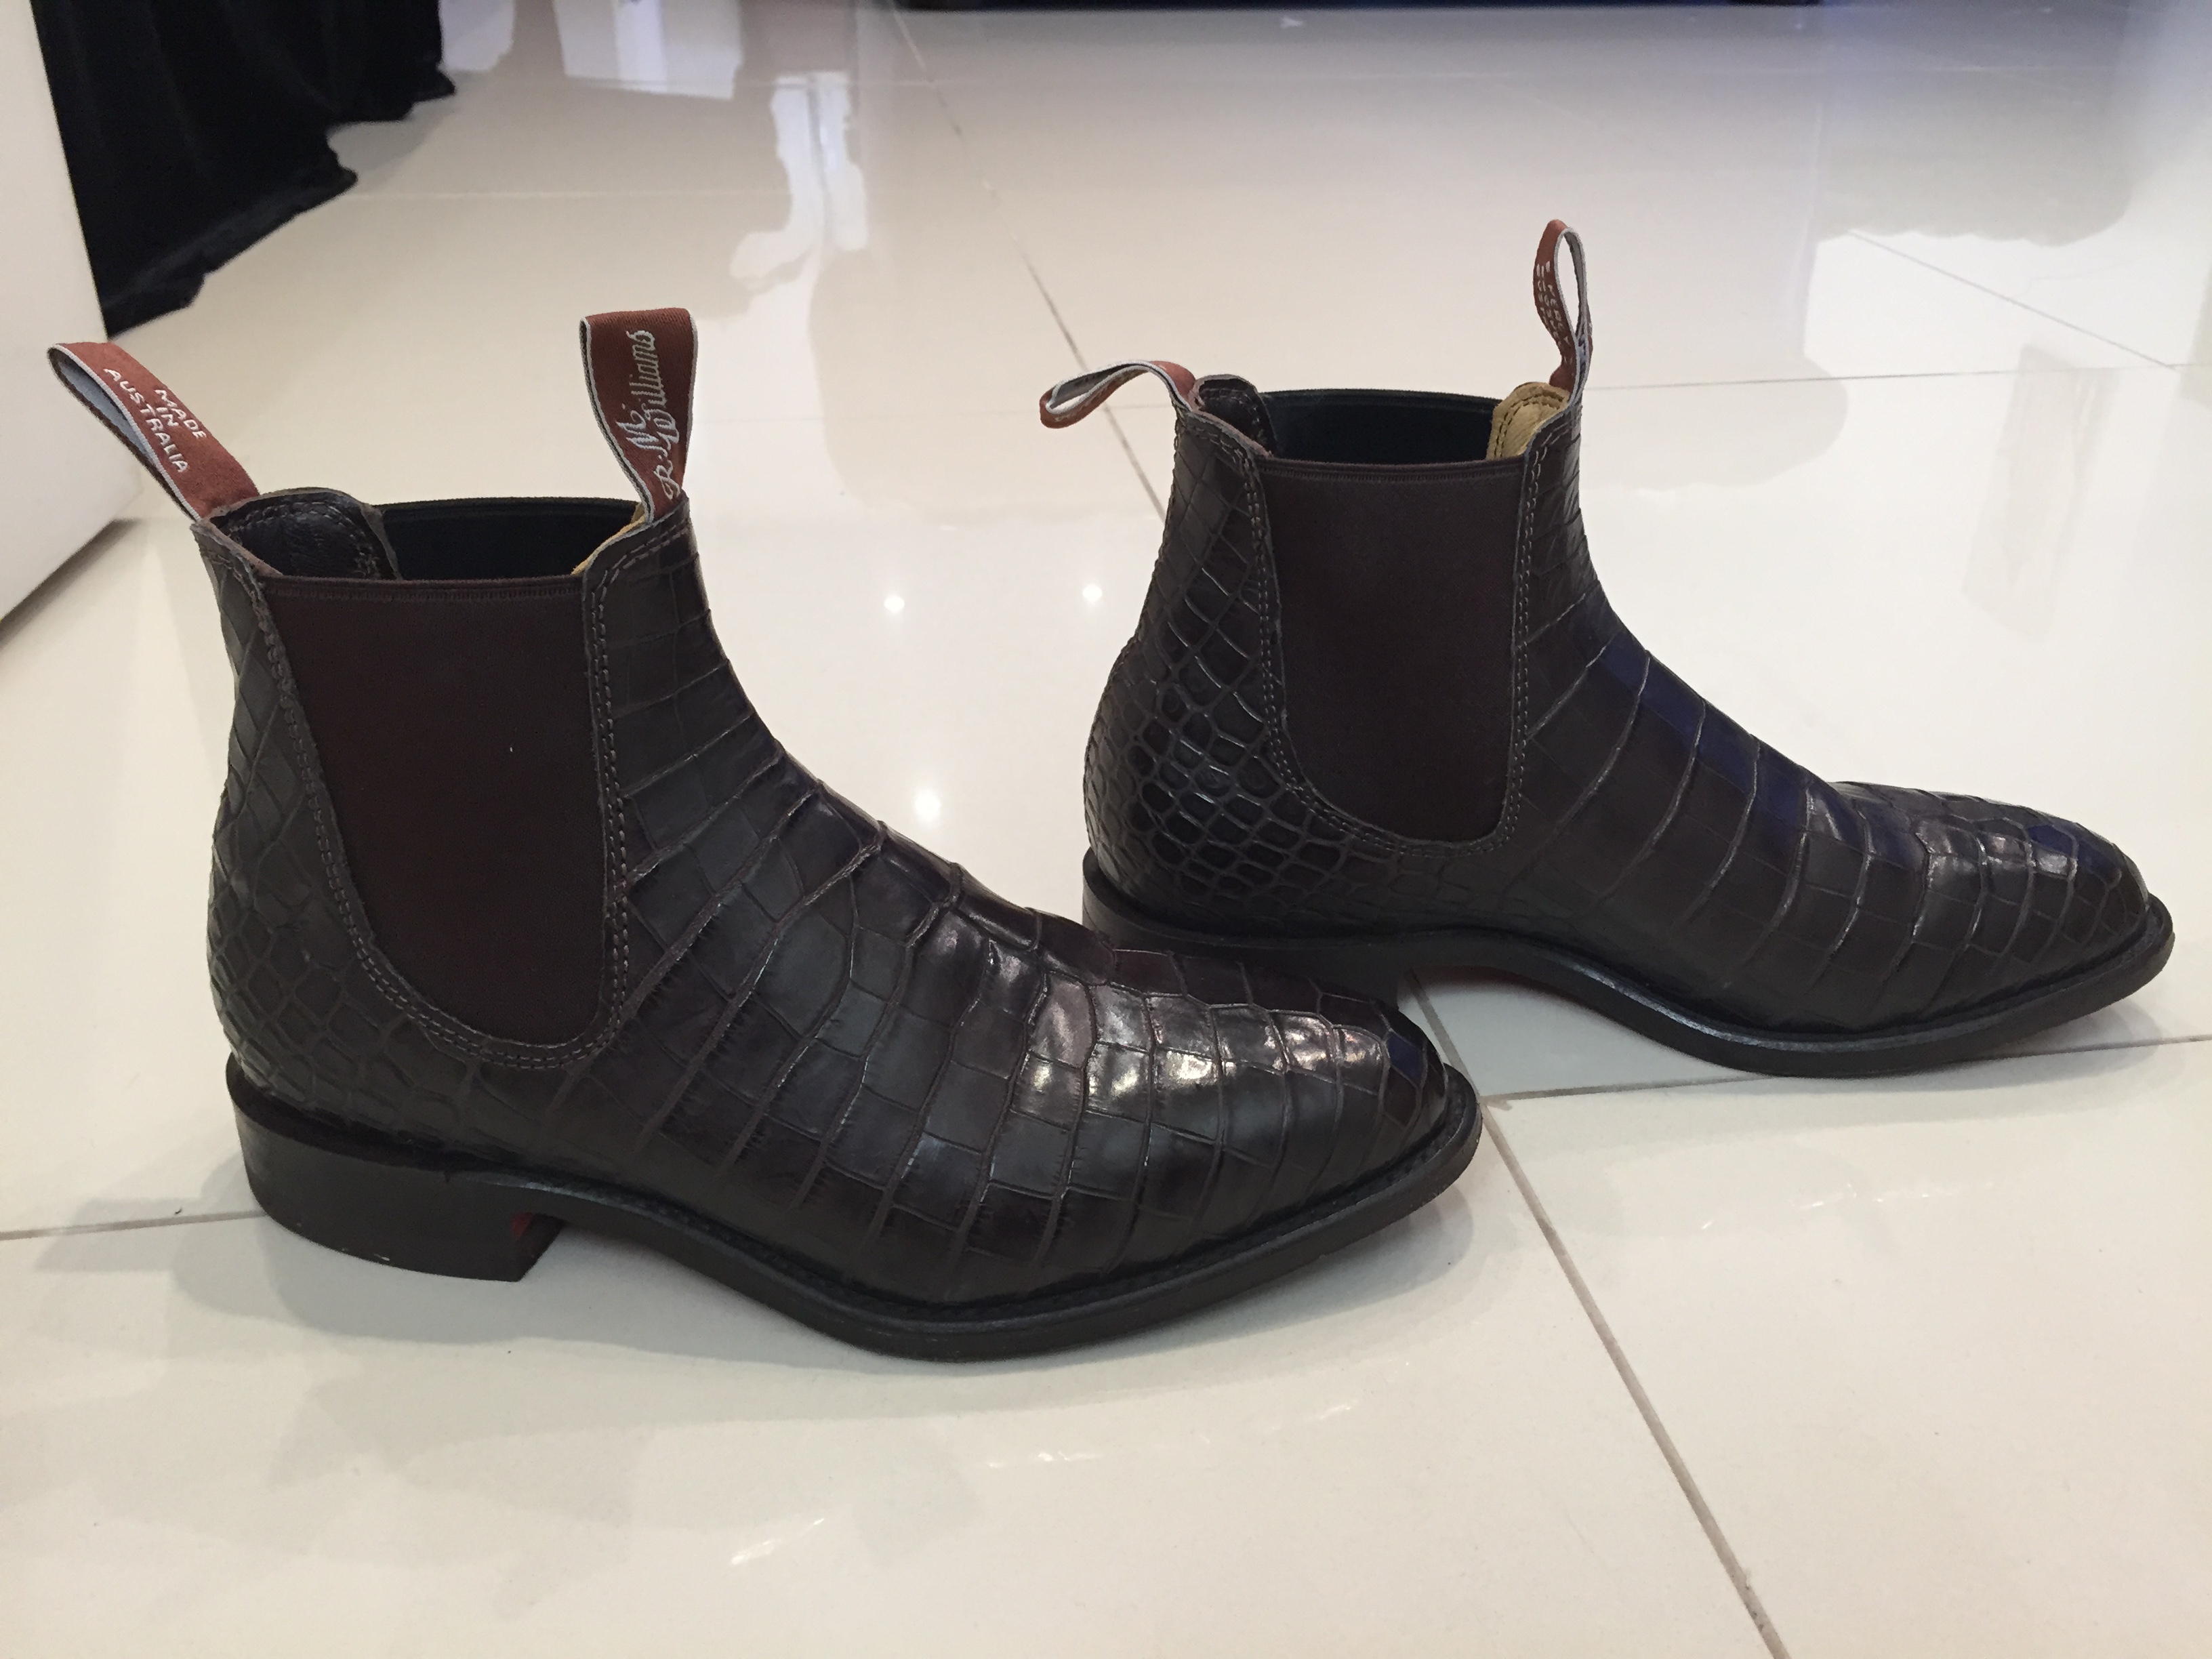 RM Williams Boots - Everything You Wanted to Know | Page 283 | Styleforum